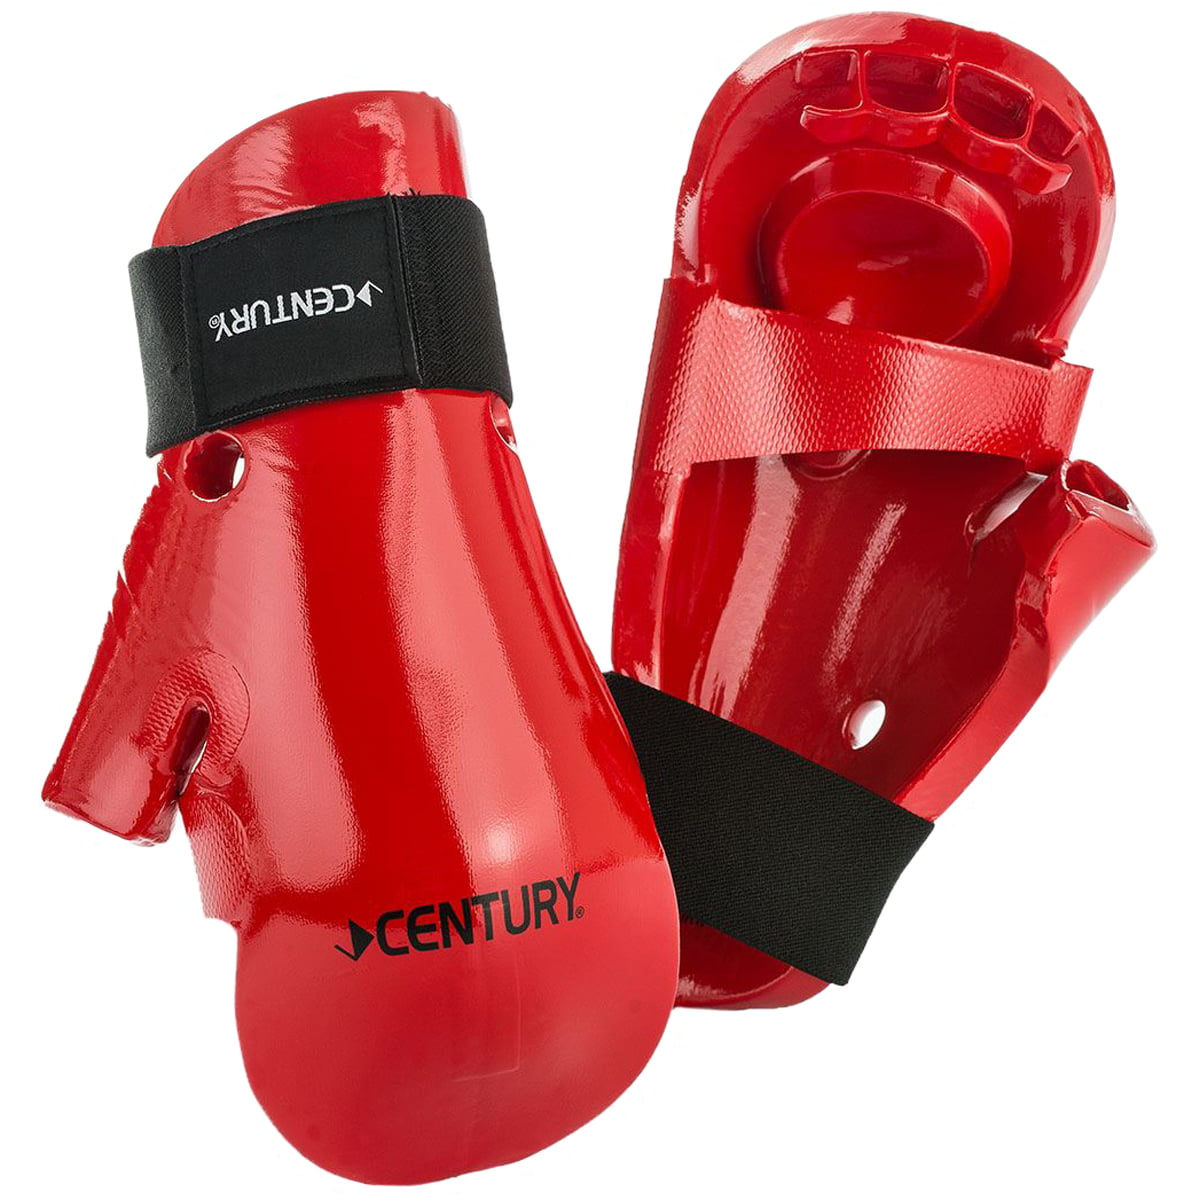 Century Martial Arts Karate Sparring Hand pads NEW in Package 